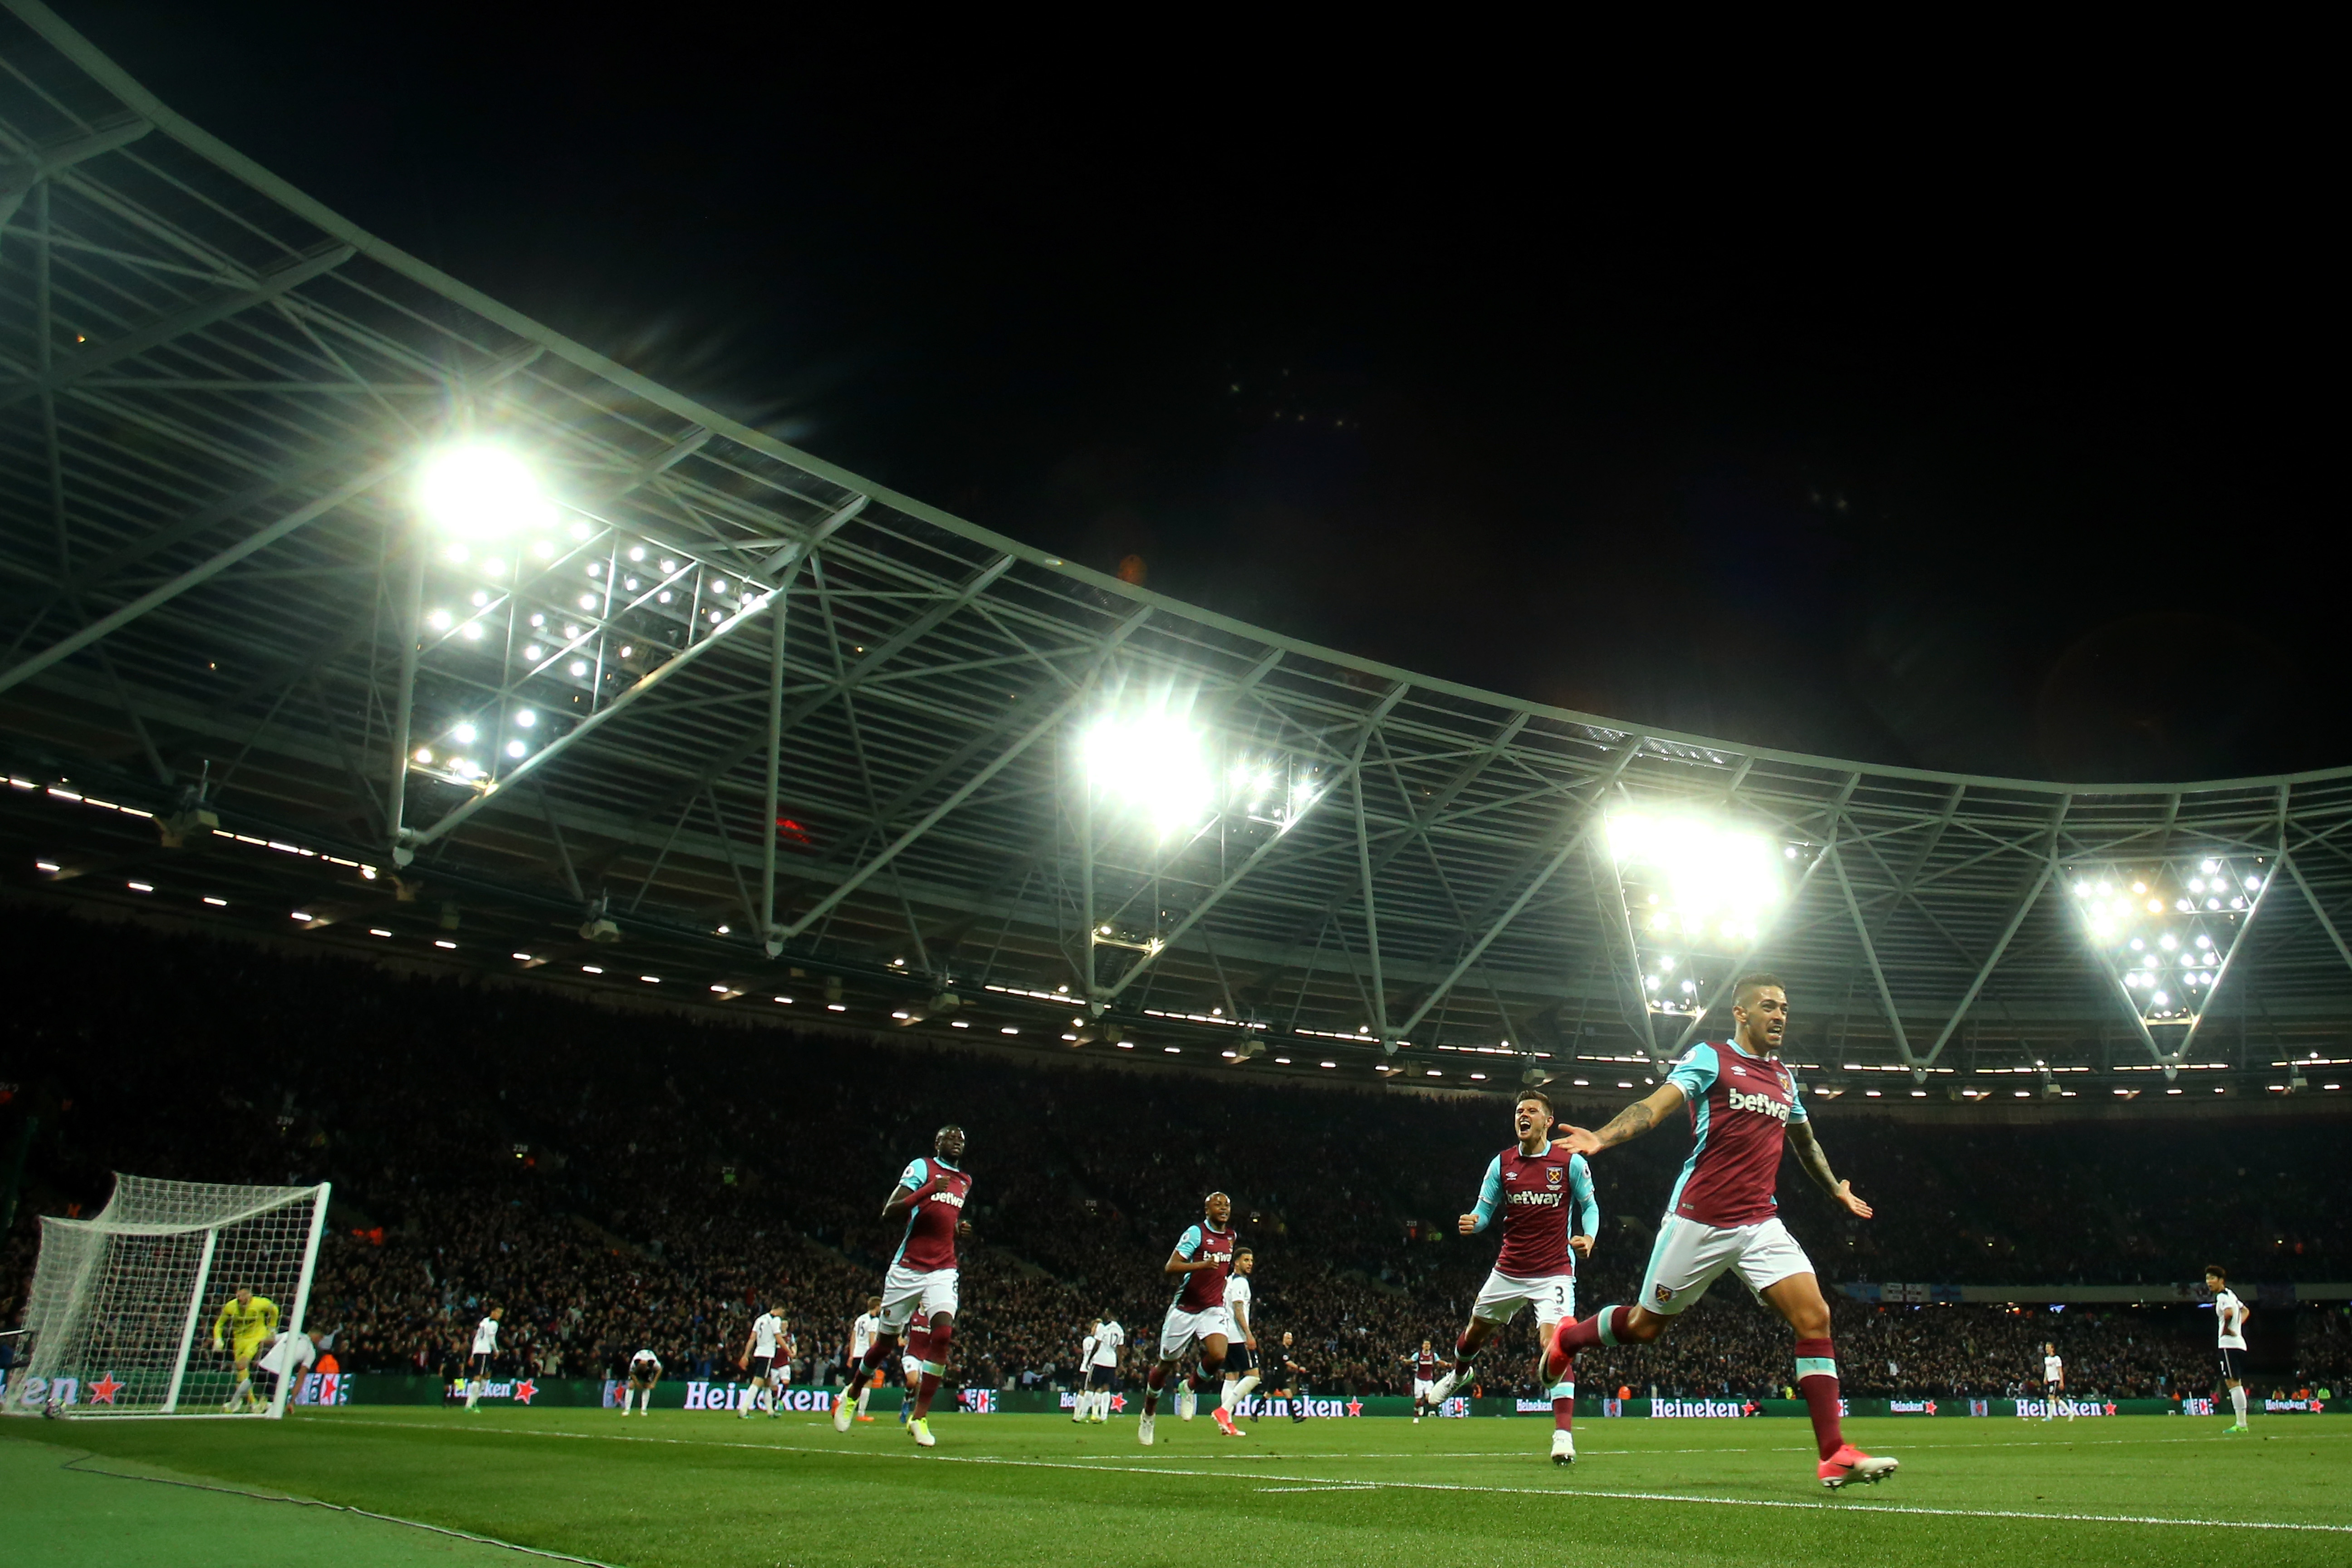 STRATFORD, ENGLAND - MAY 05:  Manuel Lanzini of West Ham United celebrates scoring the opening goal during the Premier League match between West Ham United and Tottenham Hotspur at the London Stadium on May 5, 2017 in Stratford, England.  (Photo by Richard Heathcote/Getty Images)